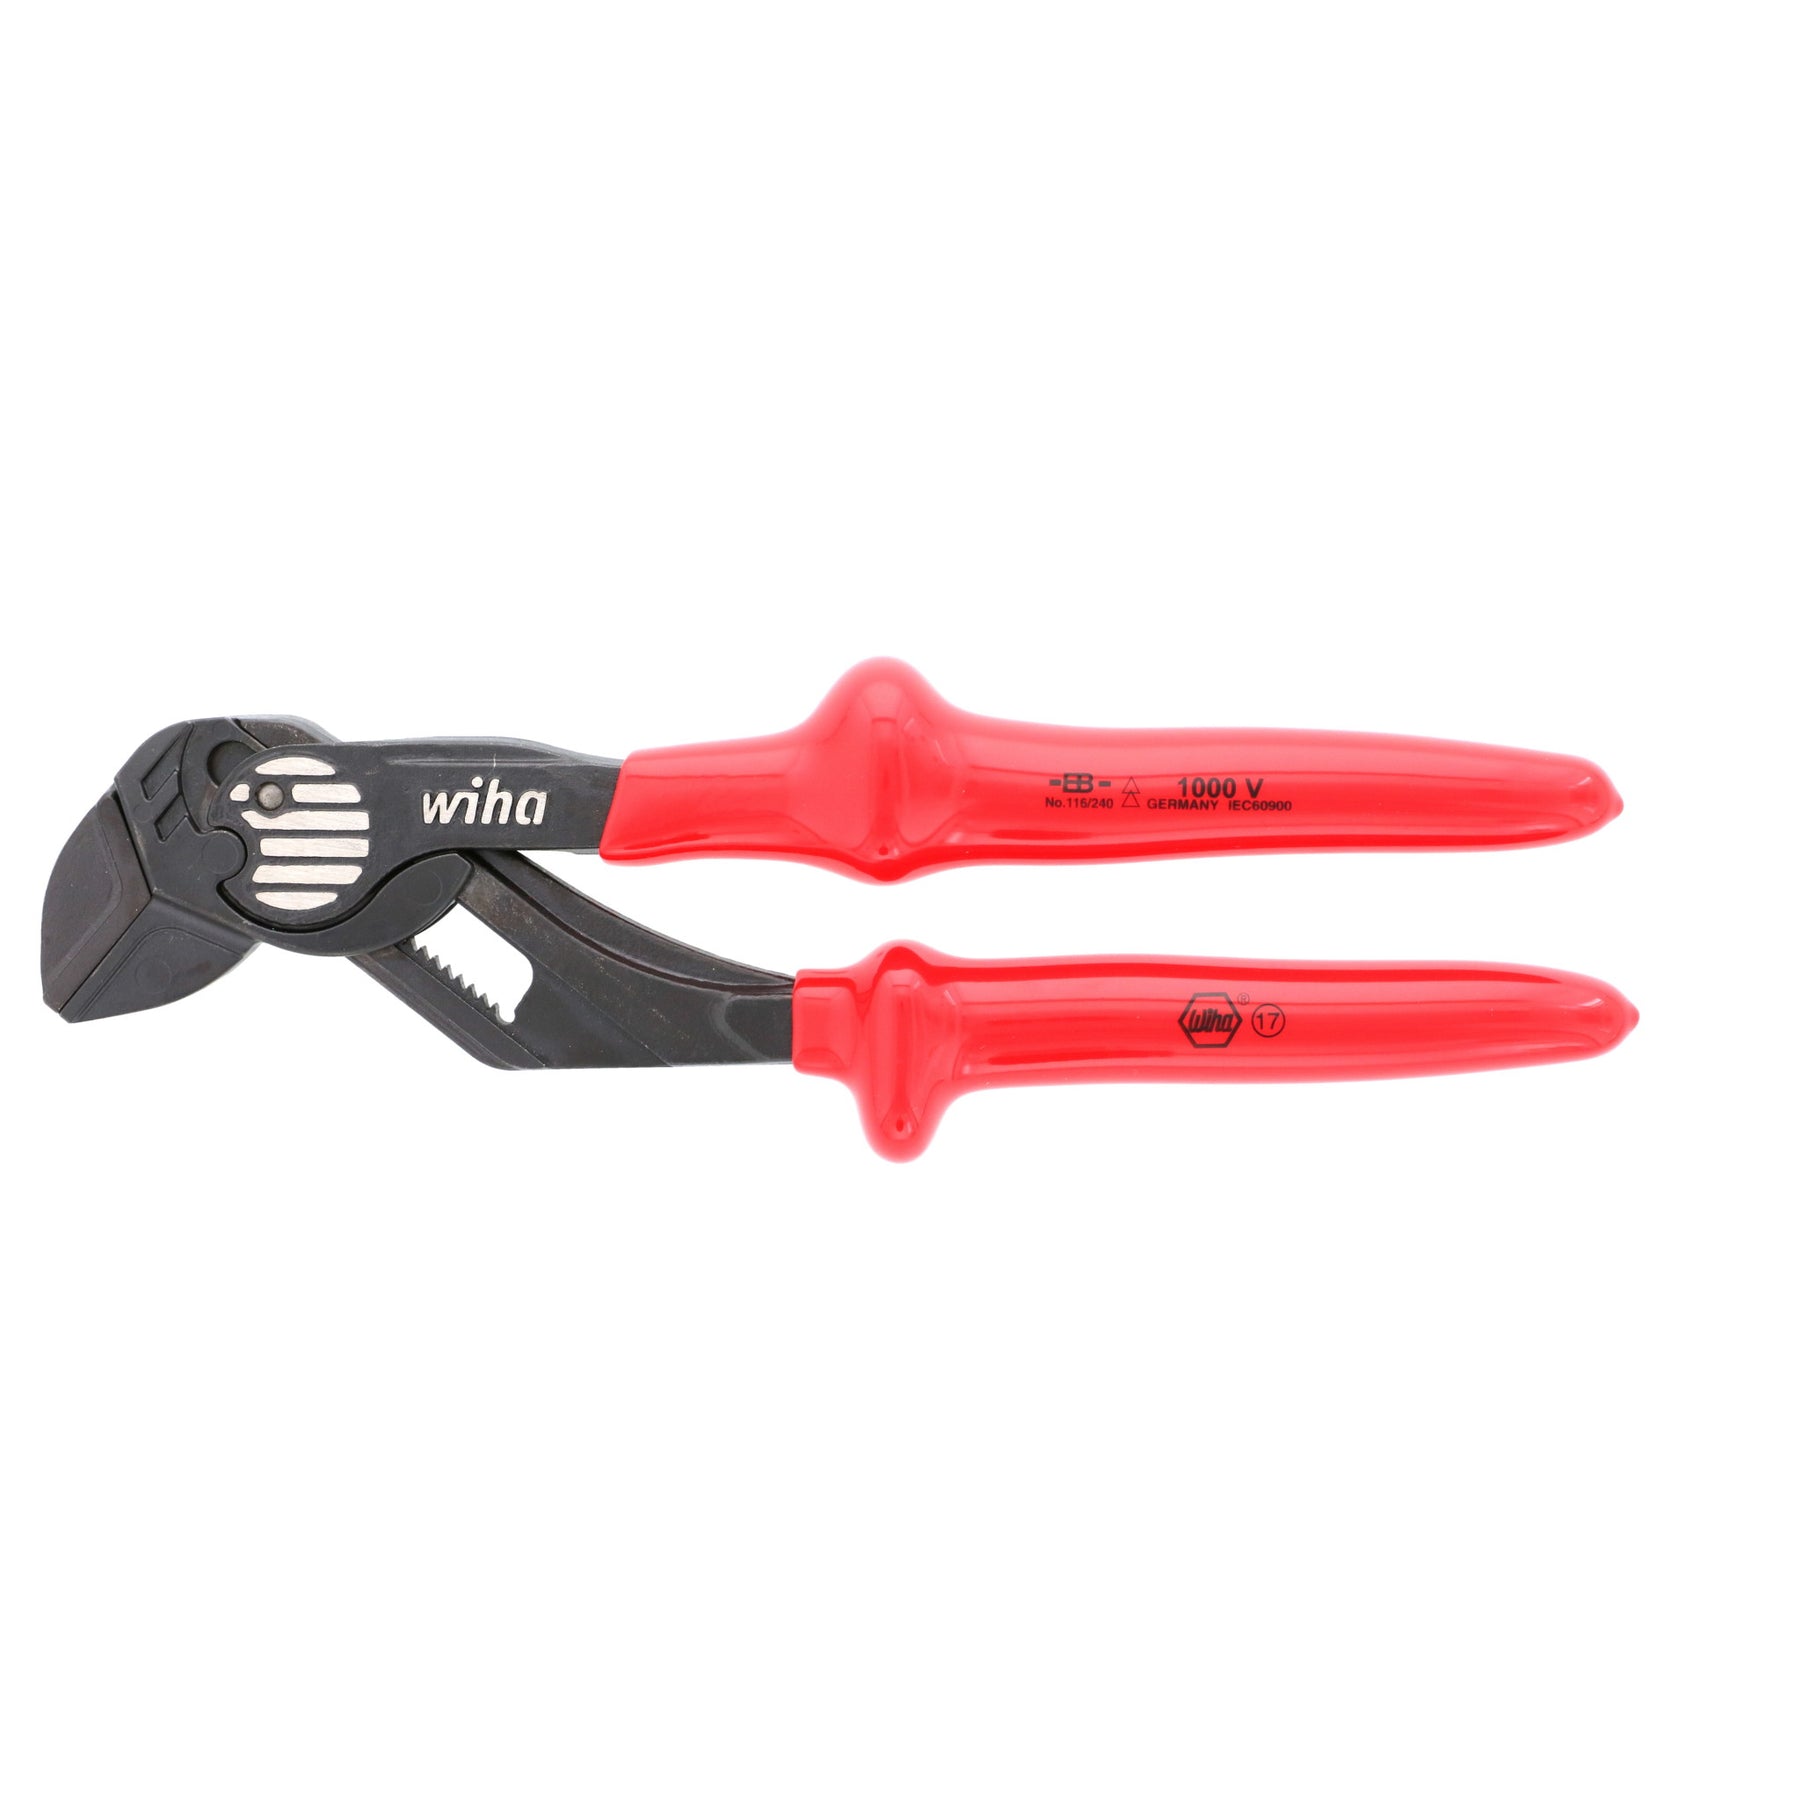 Insulated Auto Pliers Wrench